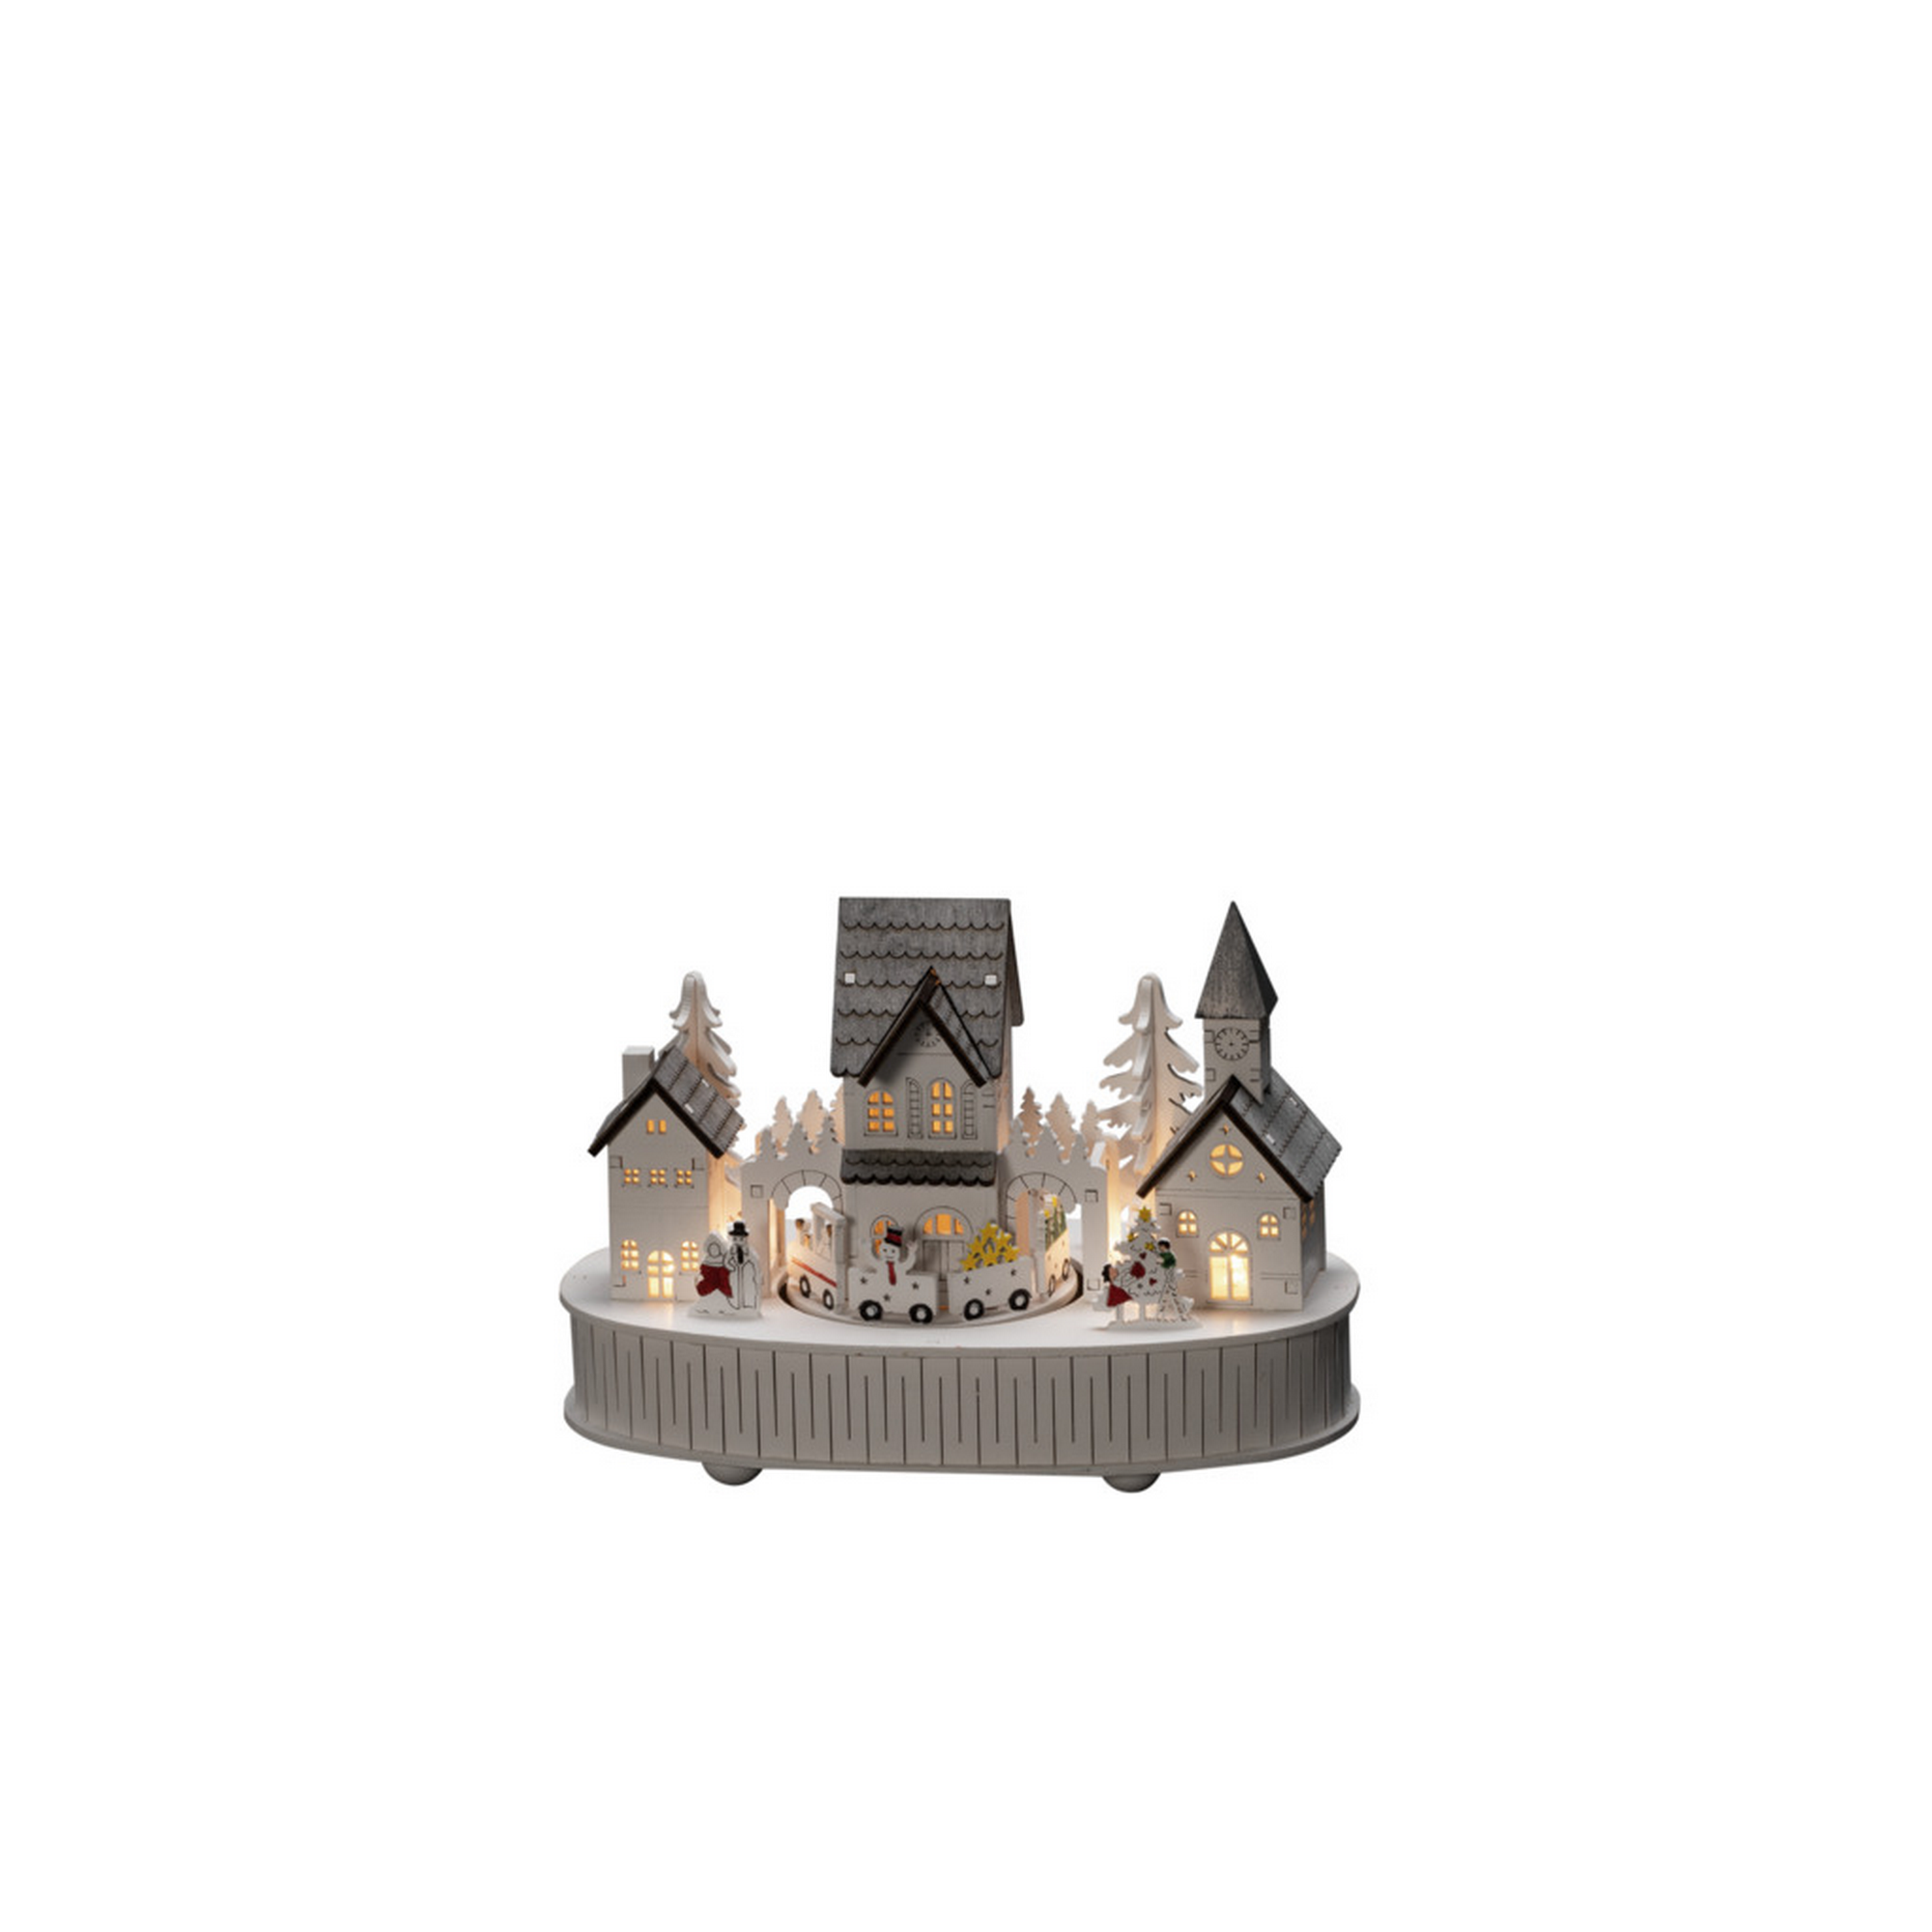 LED-Holzsilhouette 'Haus und Kirche' 5 LEDs warmweiß 22,7 x 12,7 cm + product picture